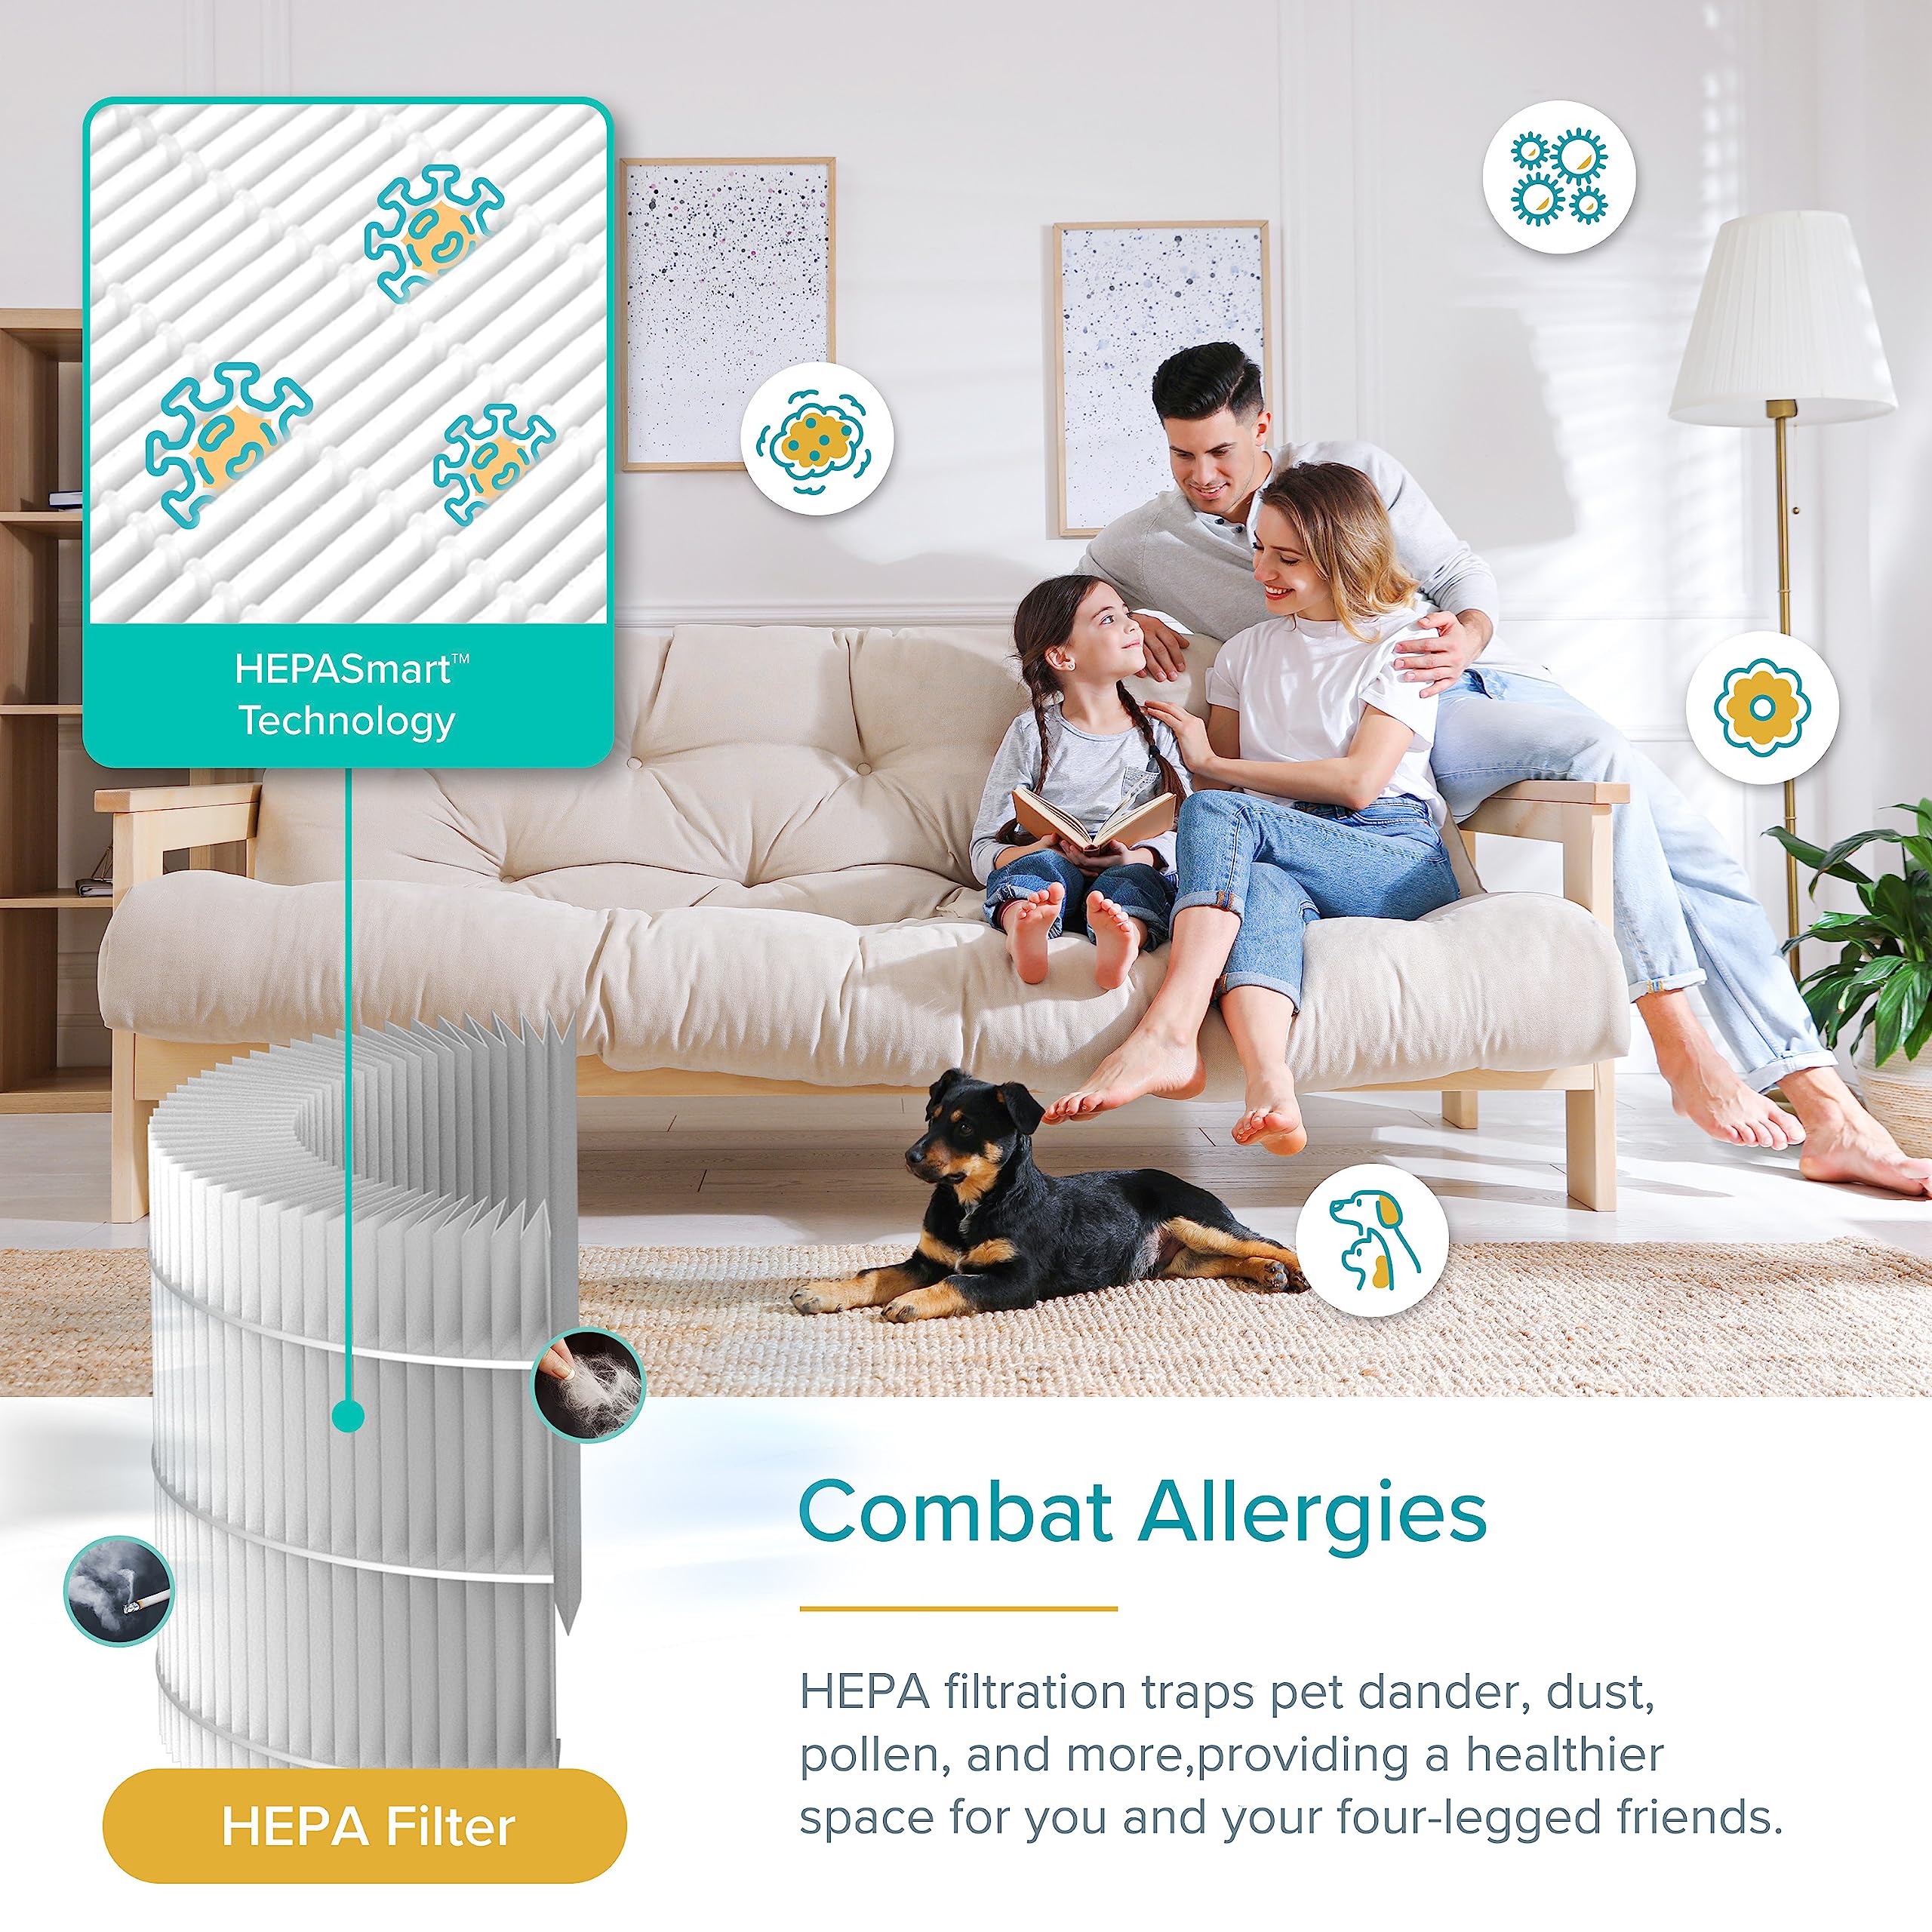 LEVOIT Pet Air Purifiers for Allergies in Home Bedroom, Hepa and Efficient Activated Carbon Filter for Hair Dander Odors, Captures Smoke, Dust, Mold, Pollen, Pet Lock, Sleep Mode, Core P350, Grey